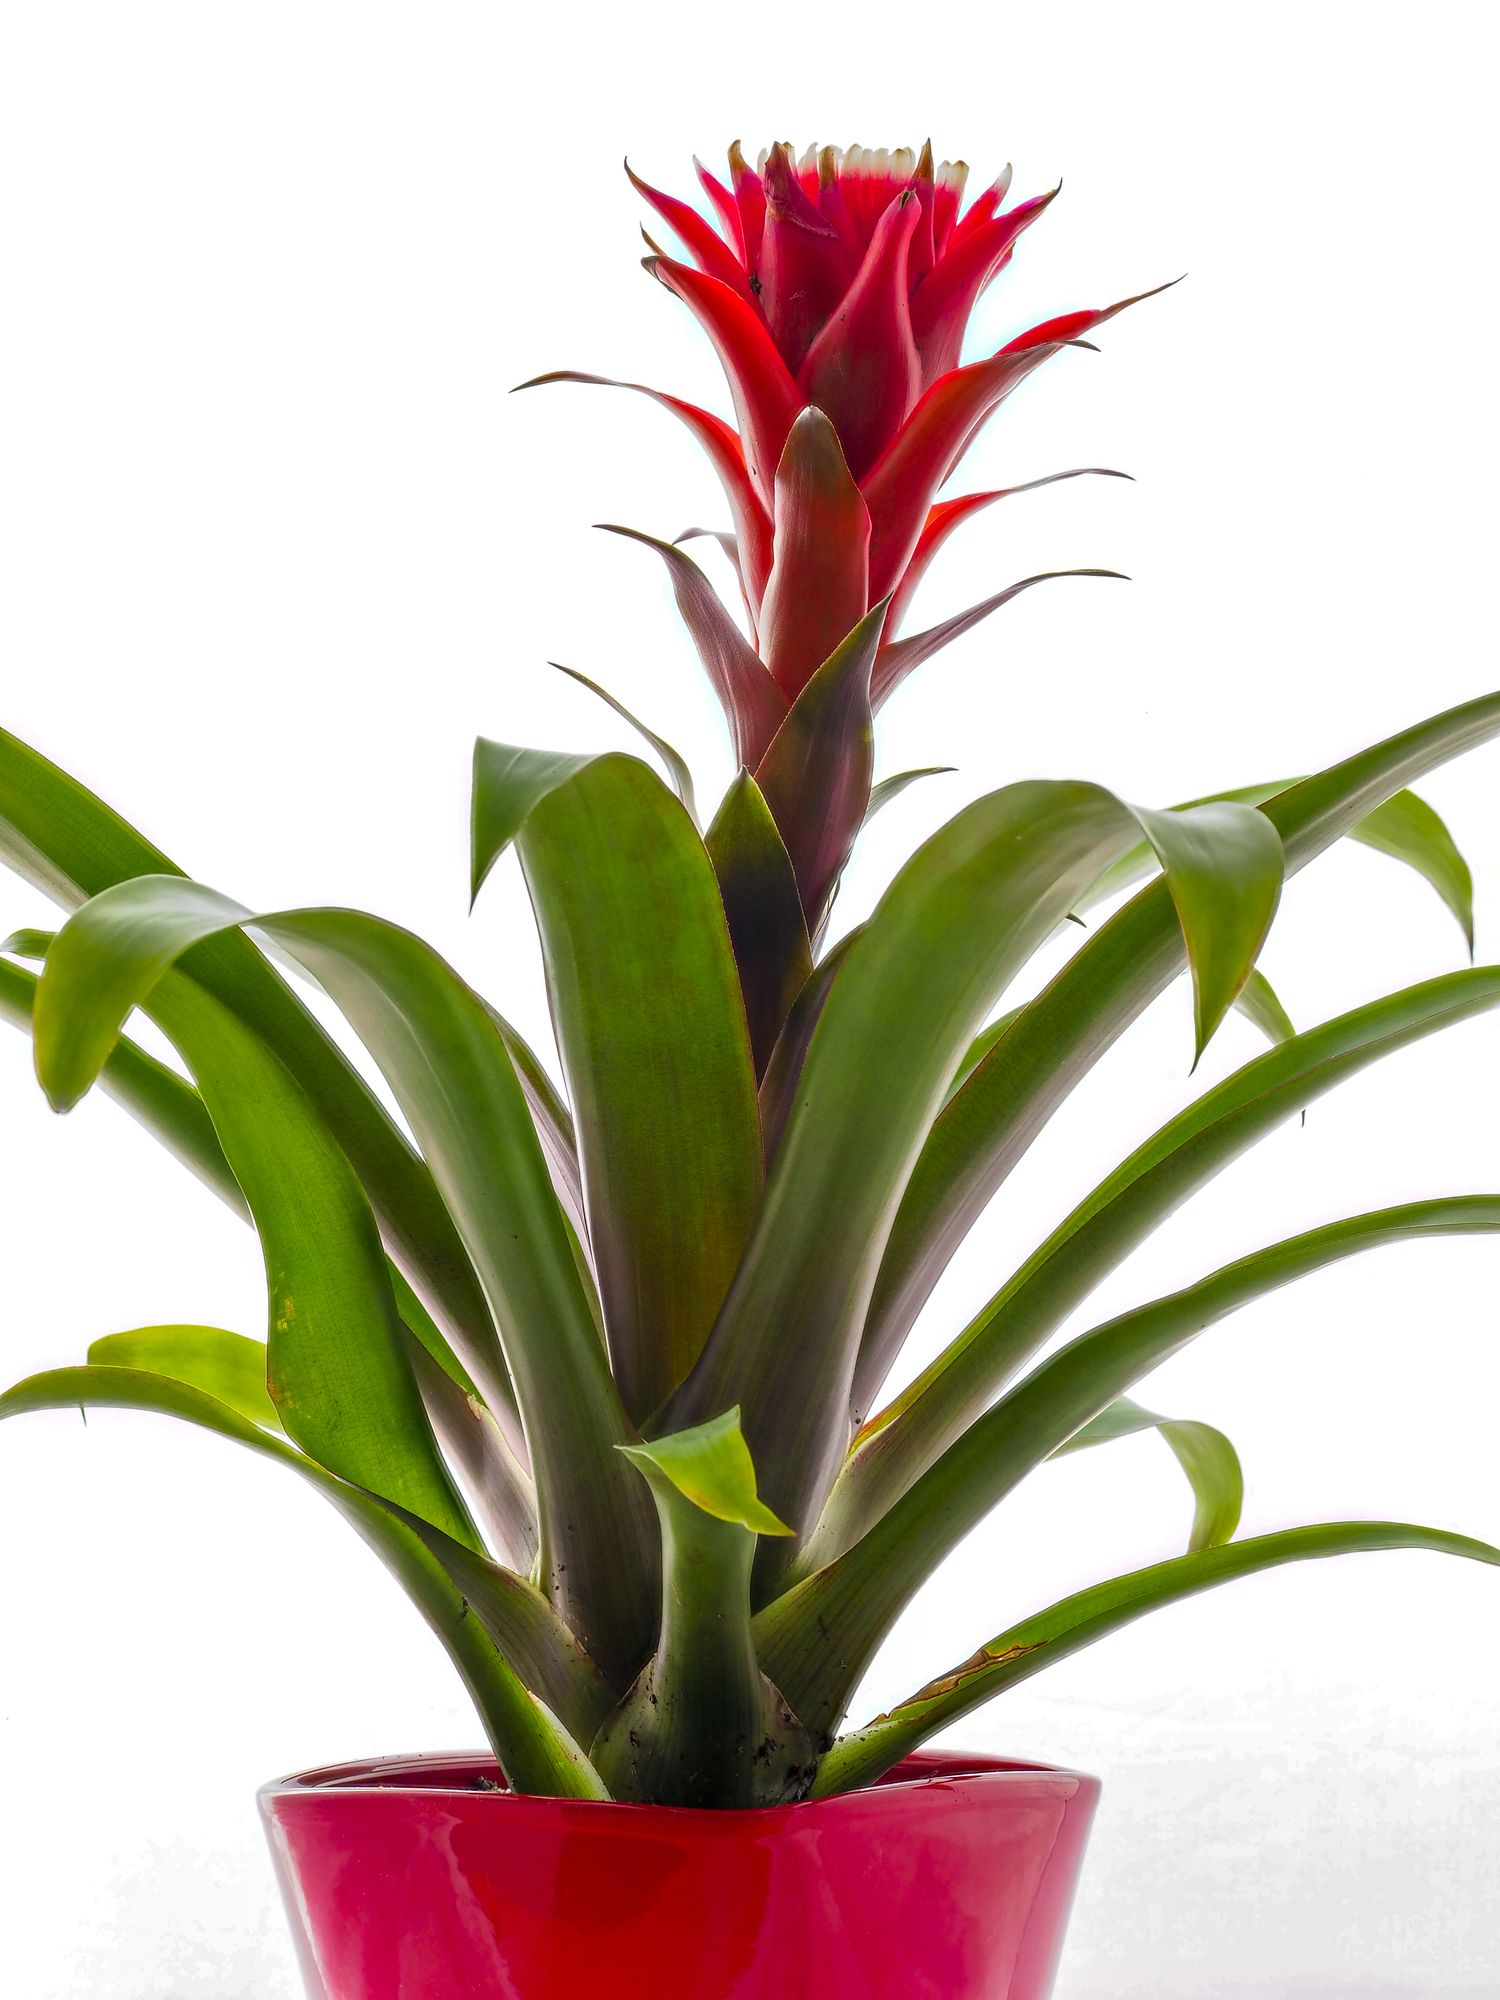 Tropical Flowers that You Can Grow at Home